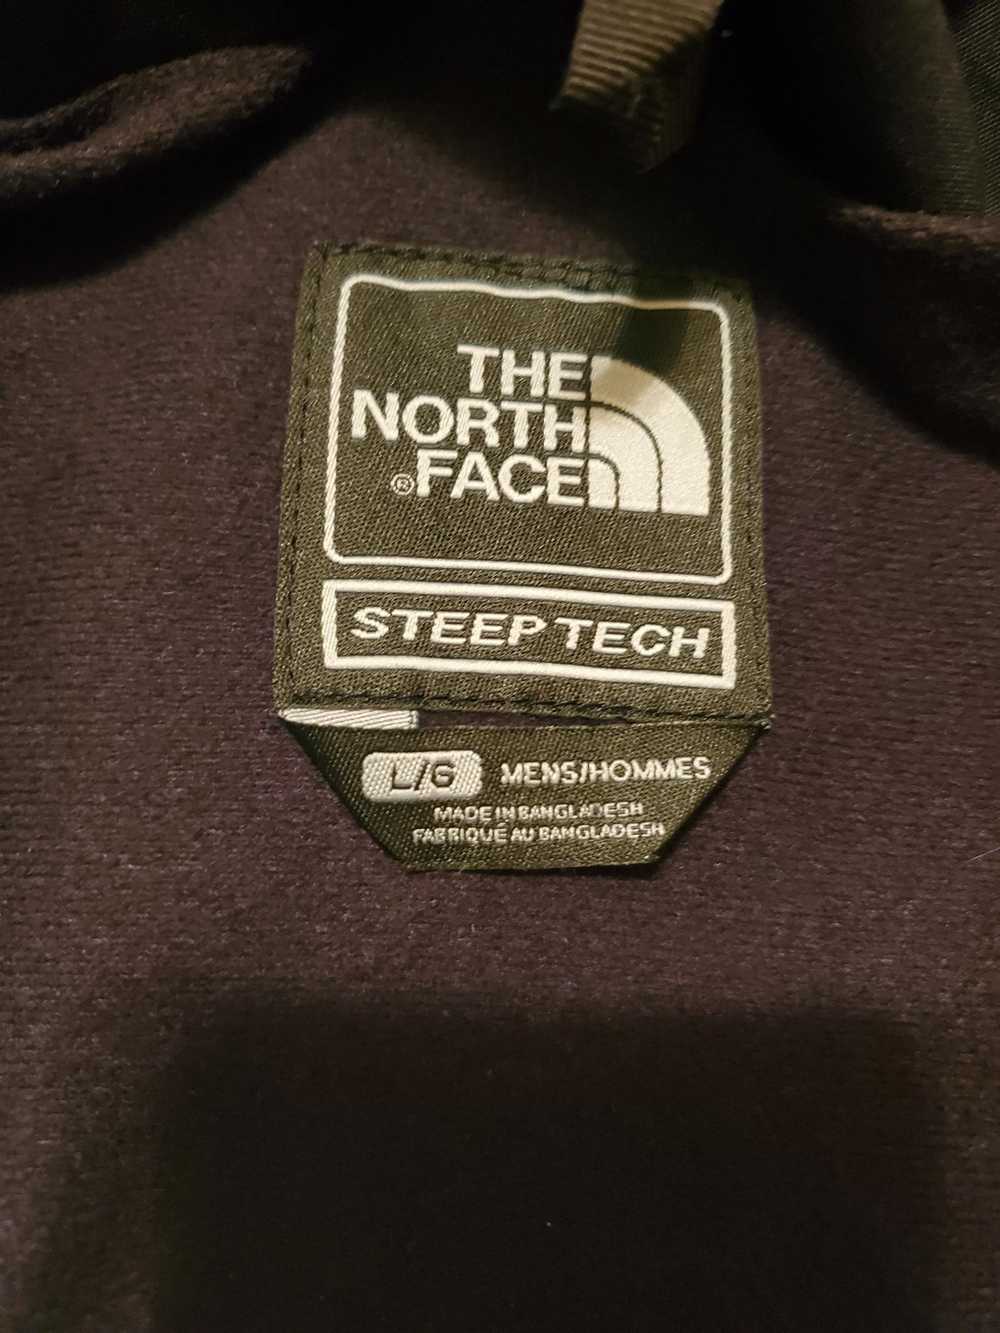 The North Face North Face Steep Tech Apogee - image 2